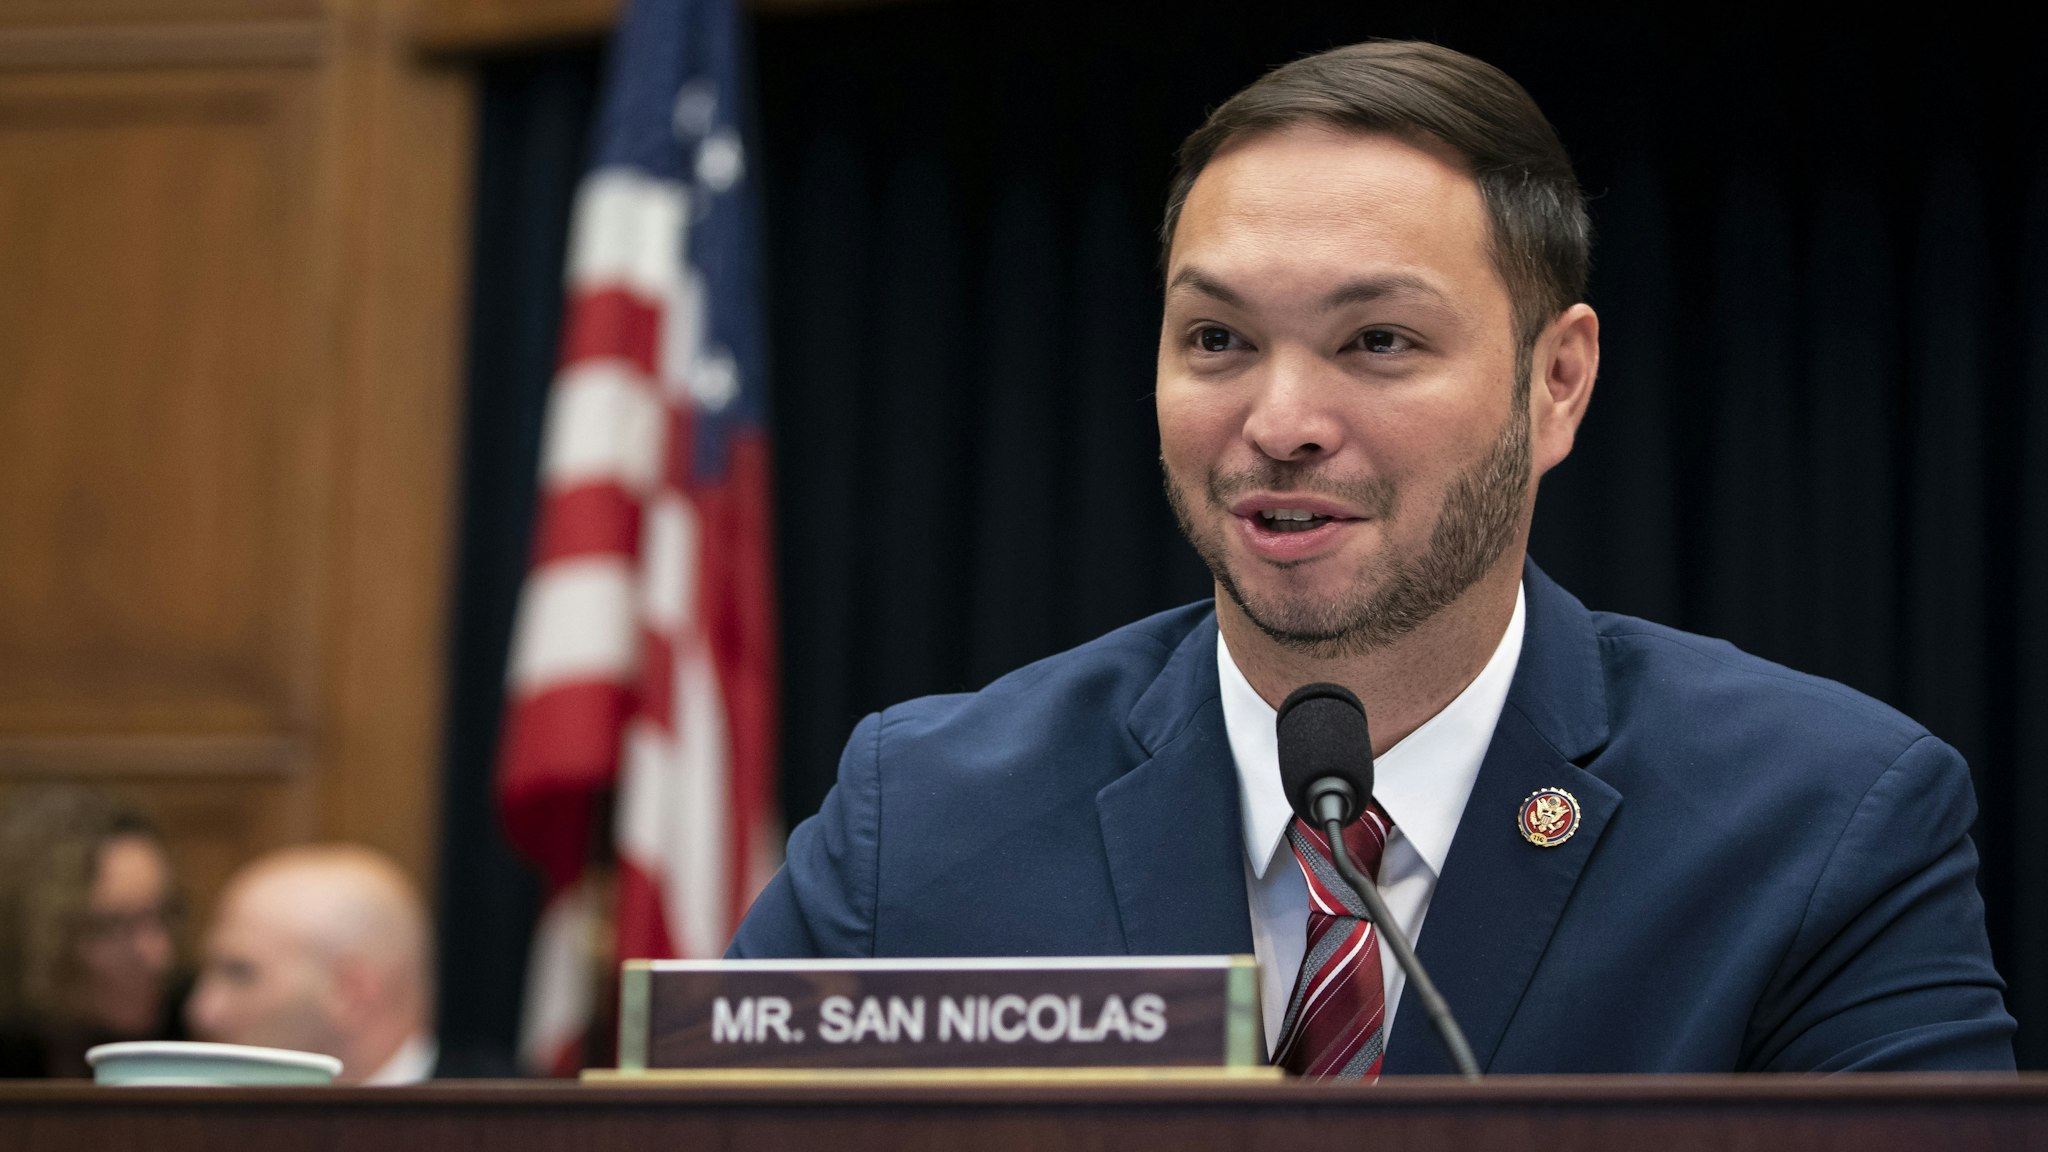 Representative Michael San Nicolas, a Democrat from Guam, speaks during a House Financial Services Committee hearing with Mark Zuckerberg, chief executive officer and founder of Facebook Inc., in Washington, D.C., U.S., on Wednesday, Oct. 23, 2019.